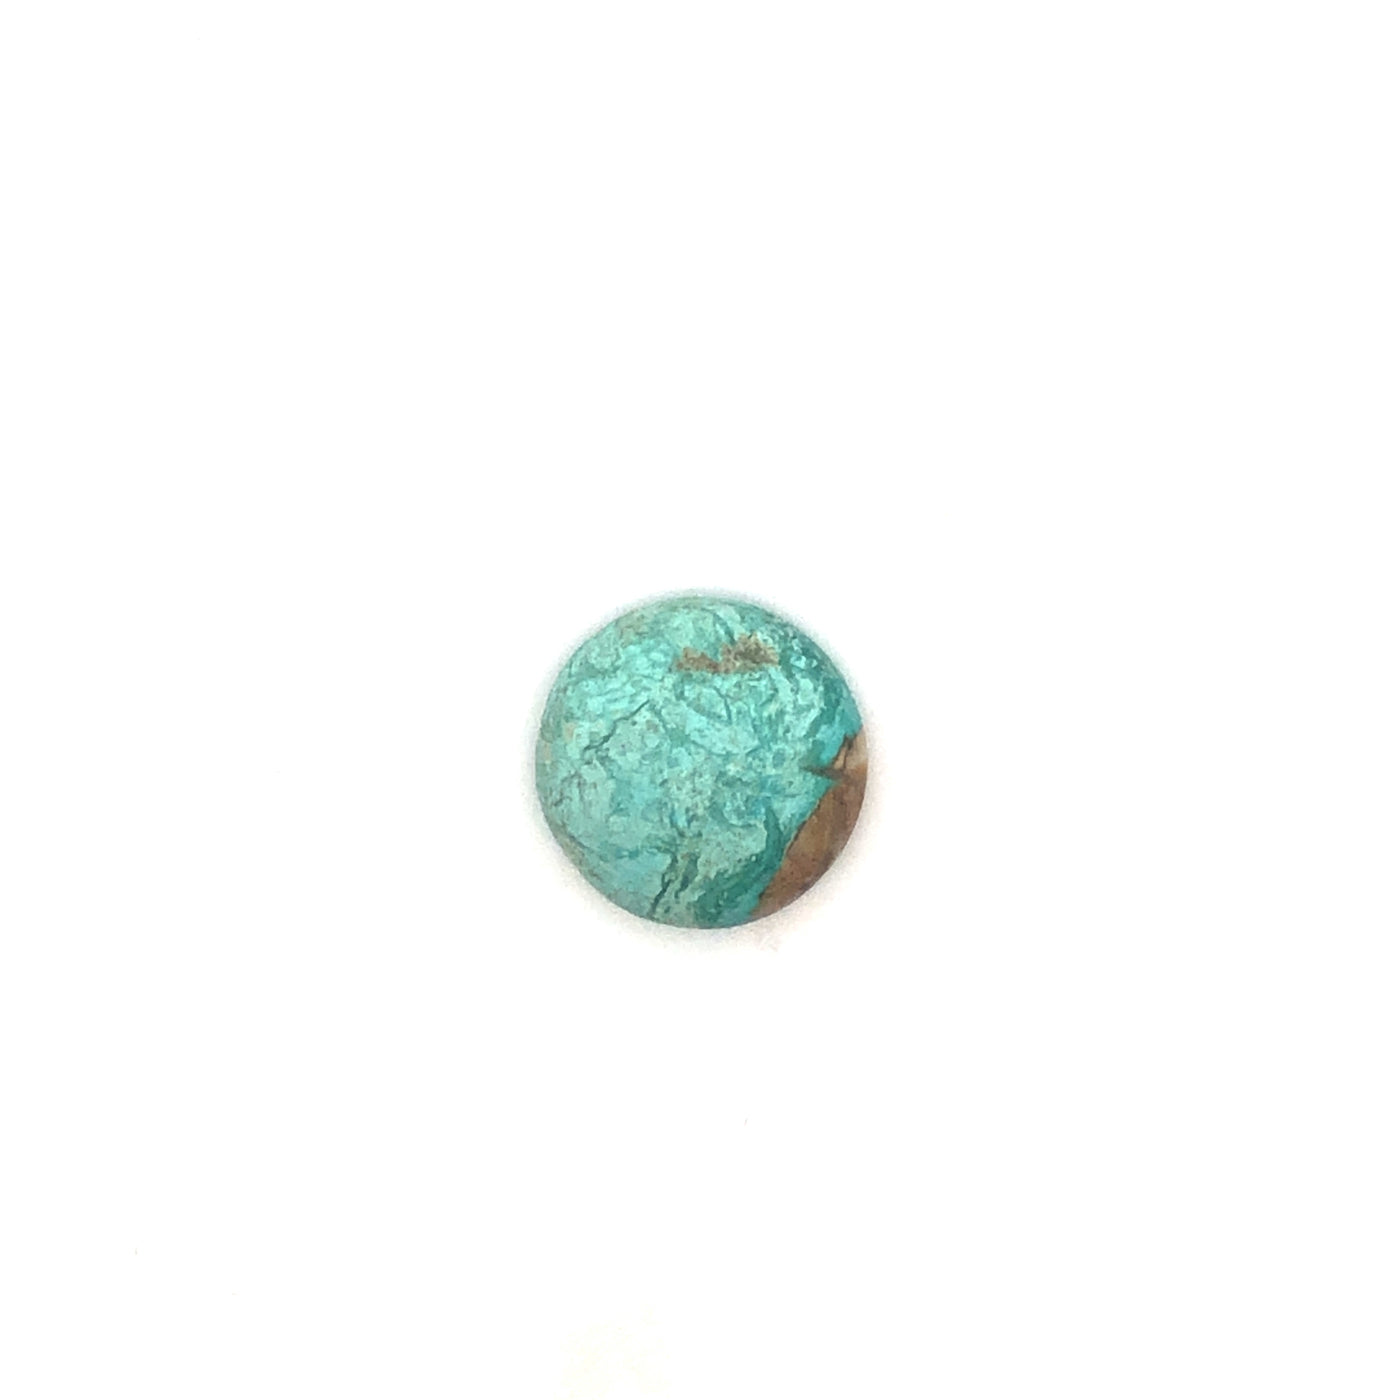 Loose Narooma Turquoise Round Shaped 12.24Ct Blue With Some Brown